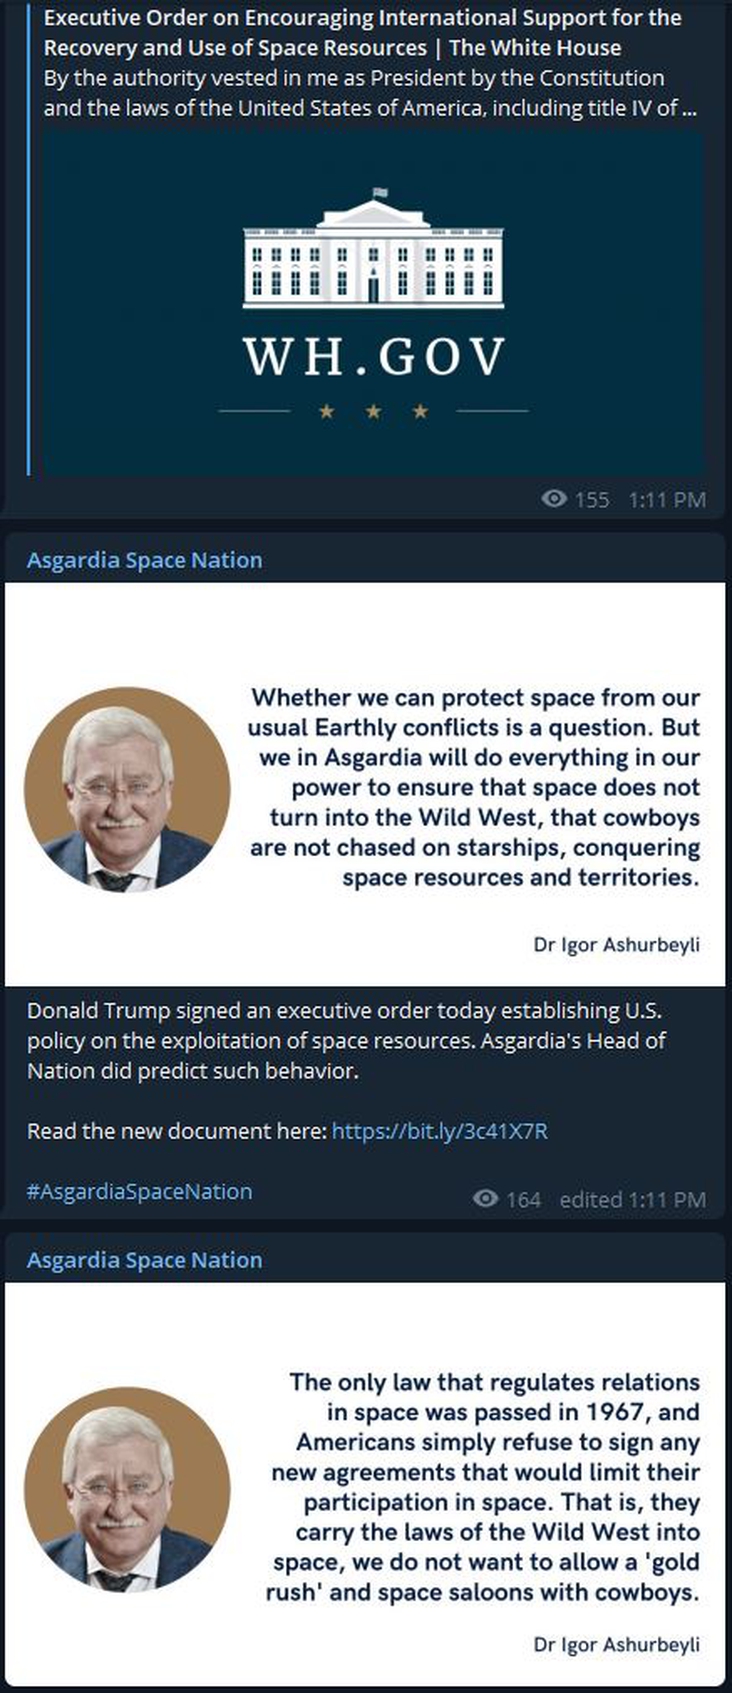 How Not To Win Friends - HoN Statements About US Use of Space Resources